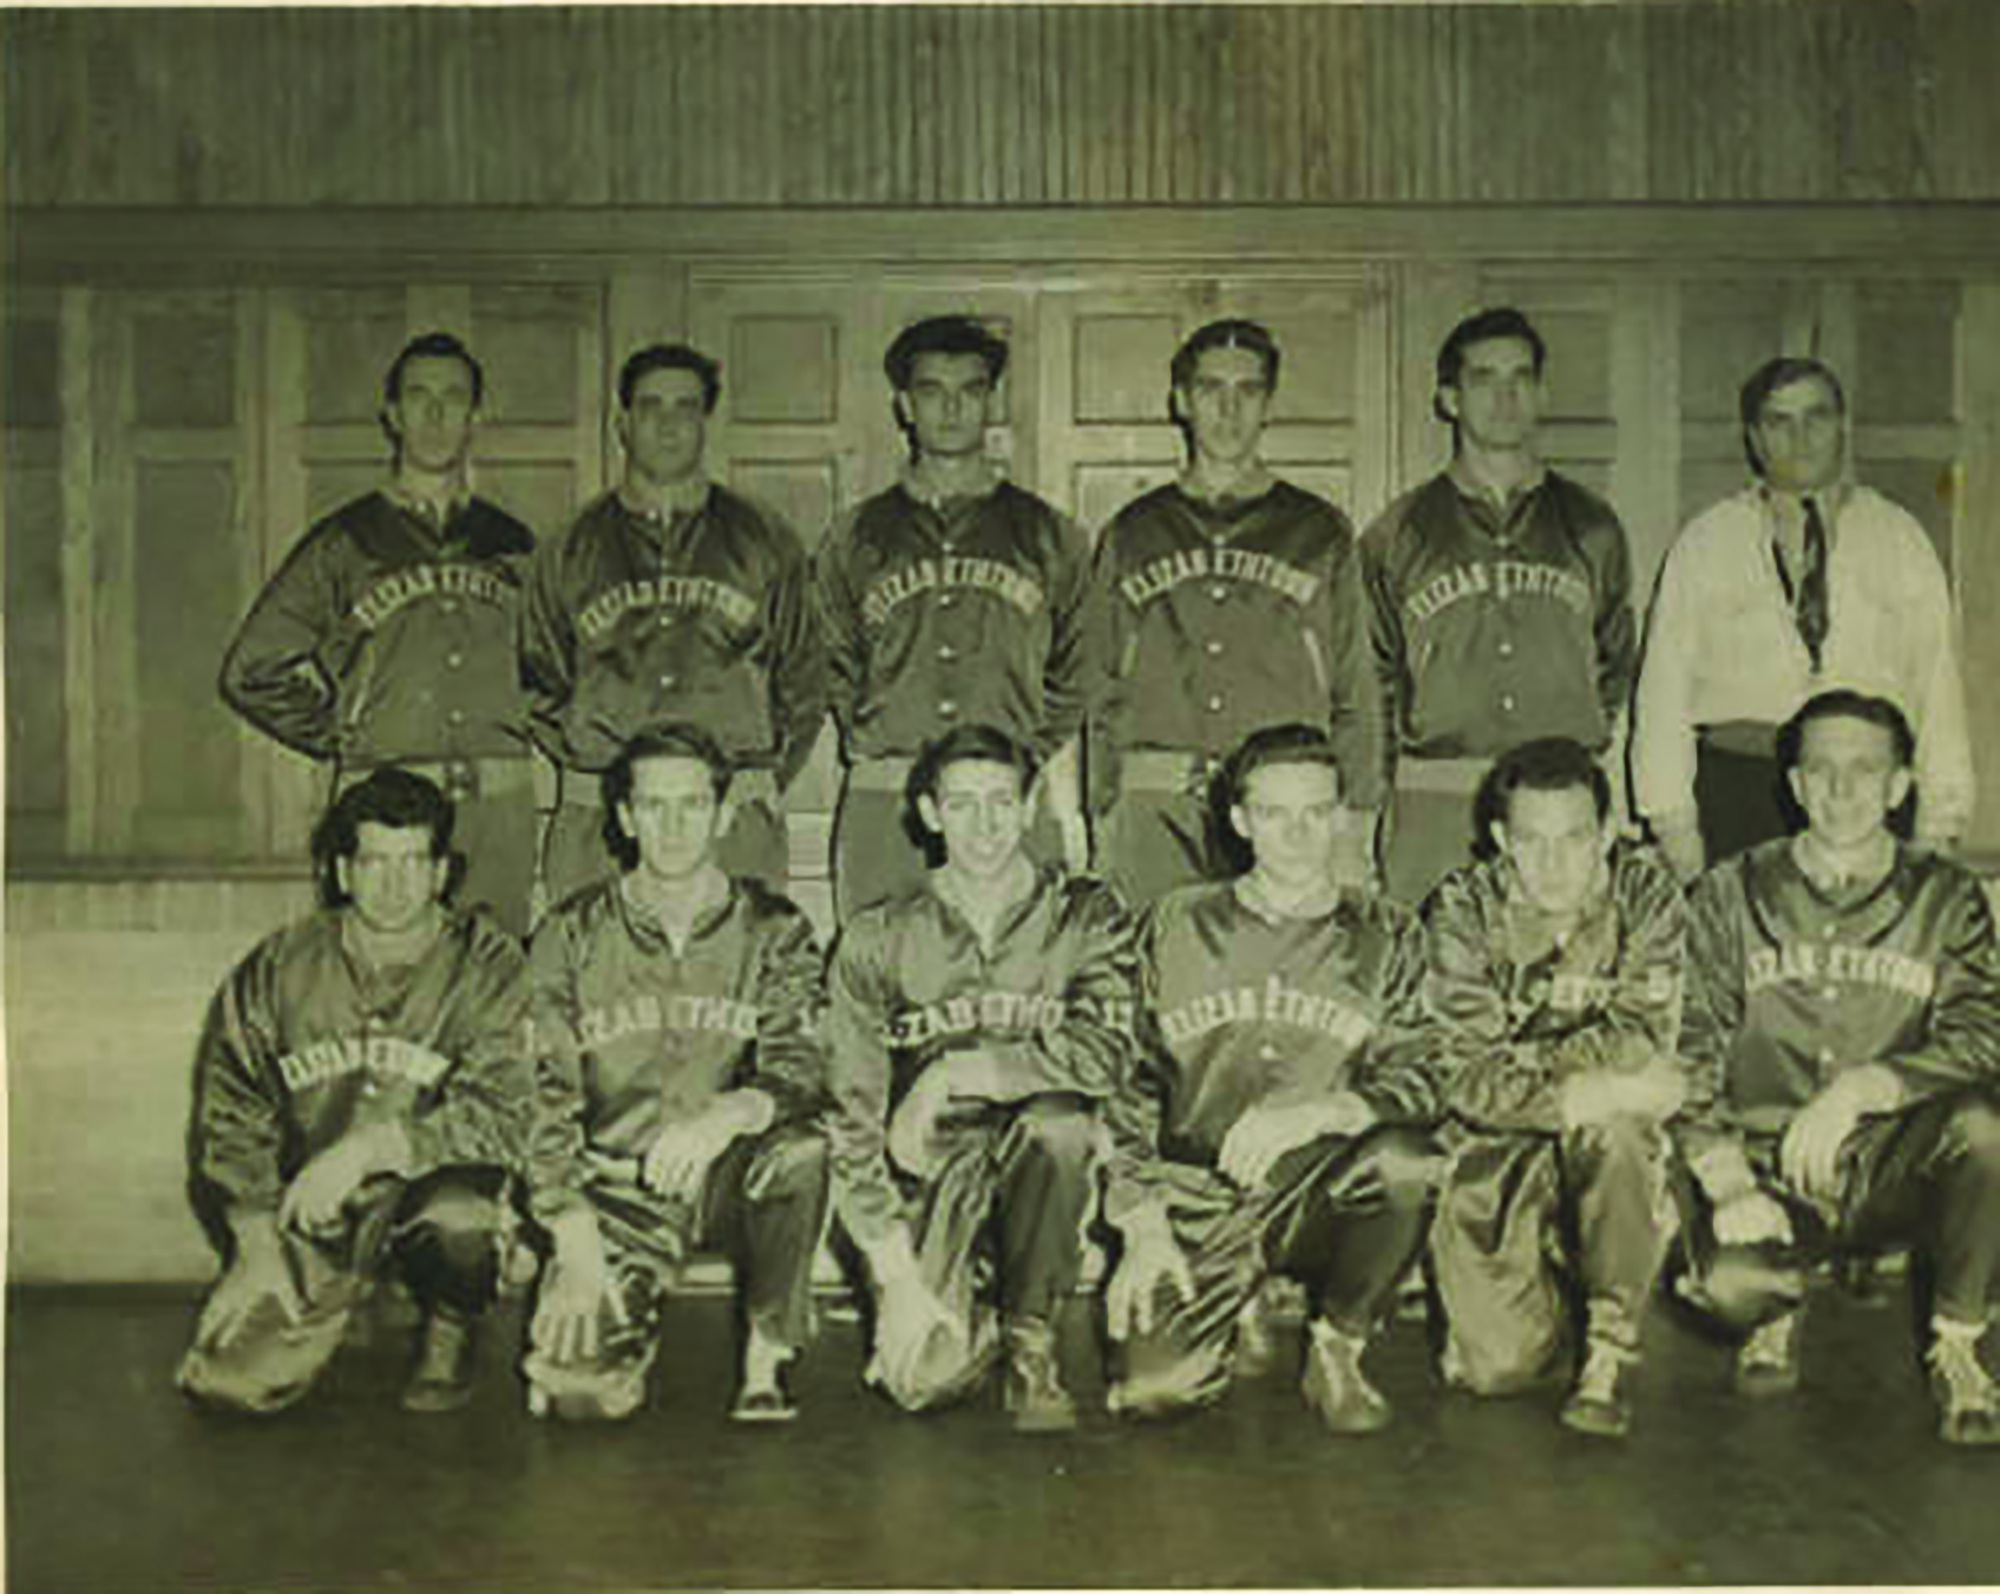 The Elizabethtown College athletic program through the years: the 1940s